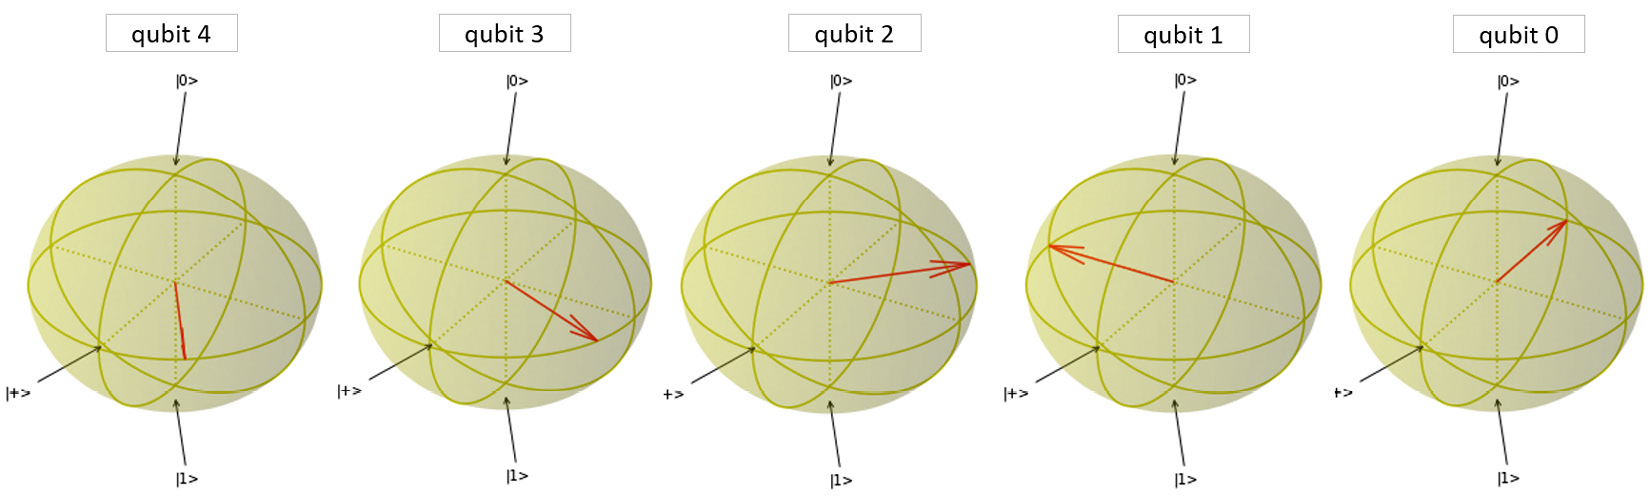 Figure 7.17 – Qubits representing the number 3 in the Fourier basis through phase angles
